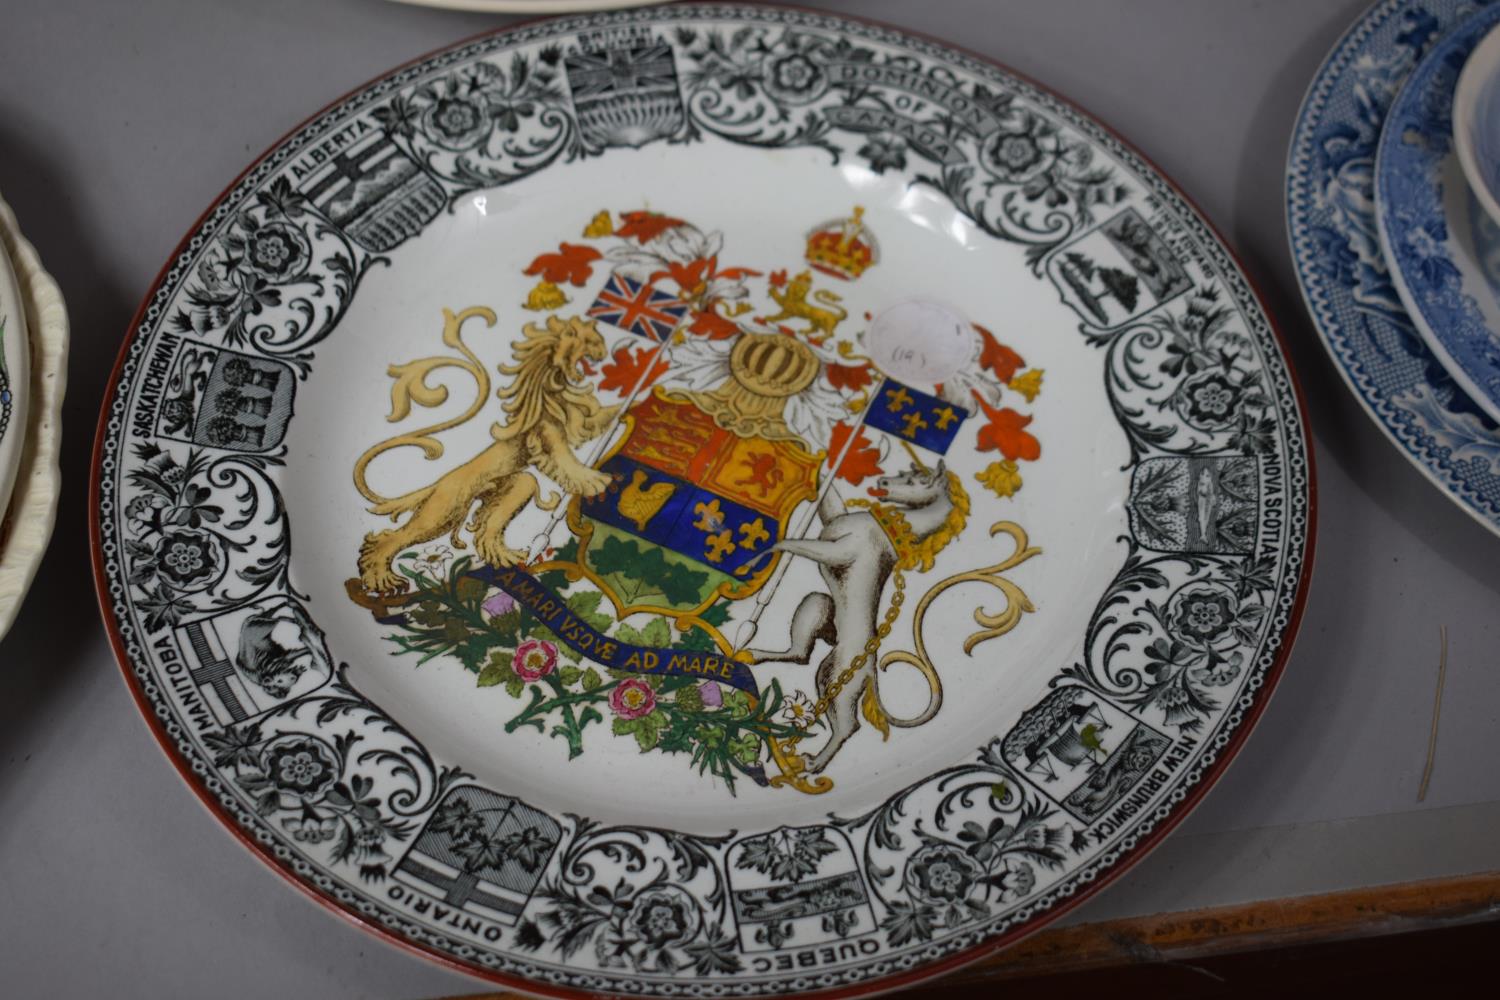 A Large Collection of Transfer Printed Commemorative Ceramics on a Topic of America and Canada to - Image 2 of 6